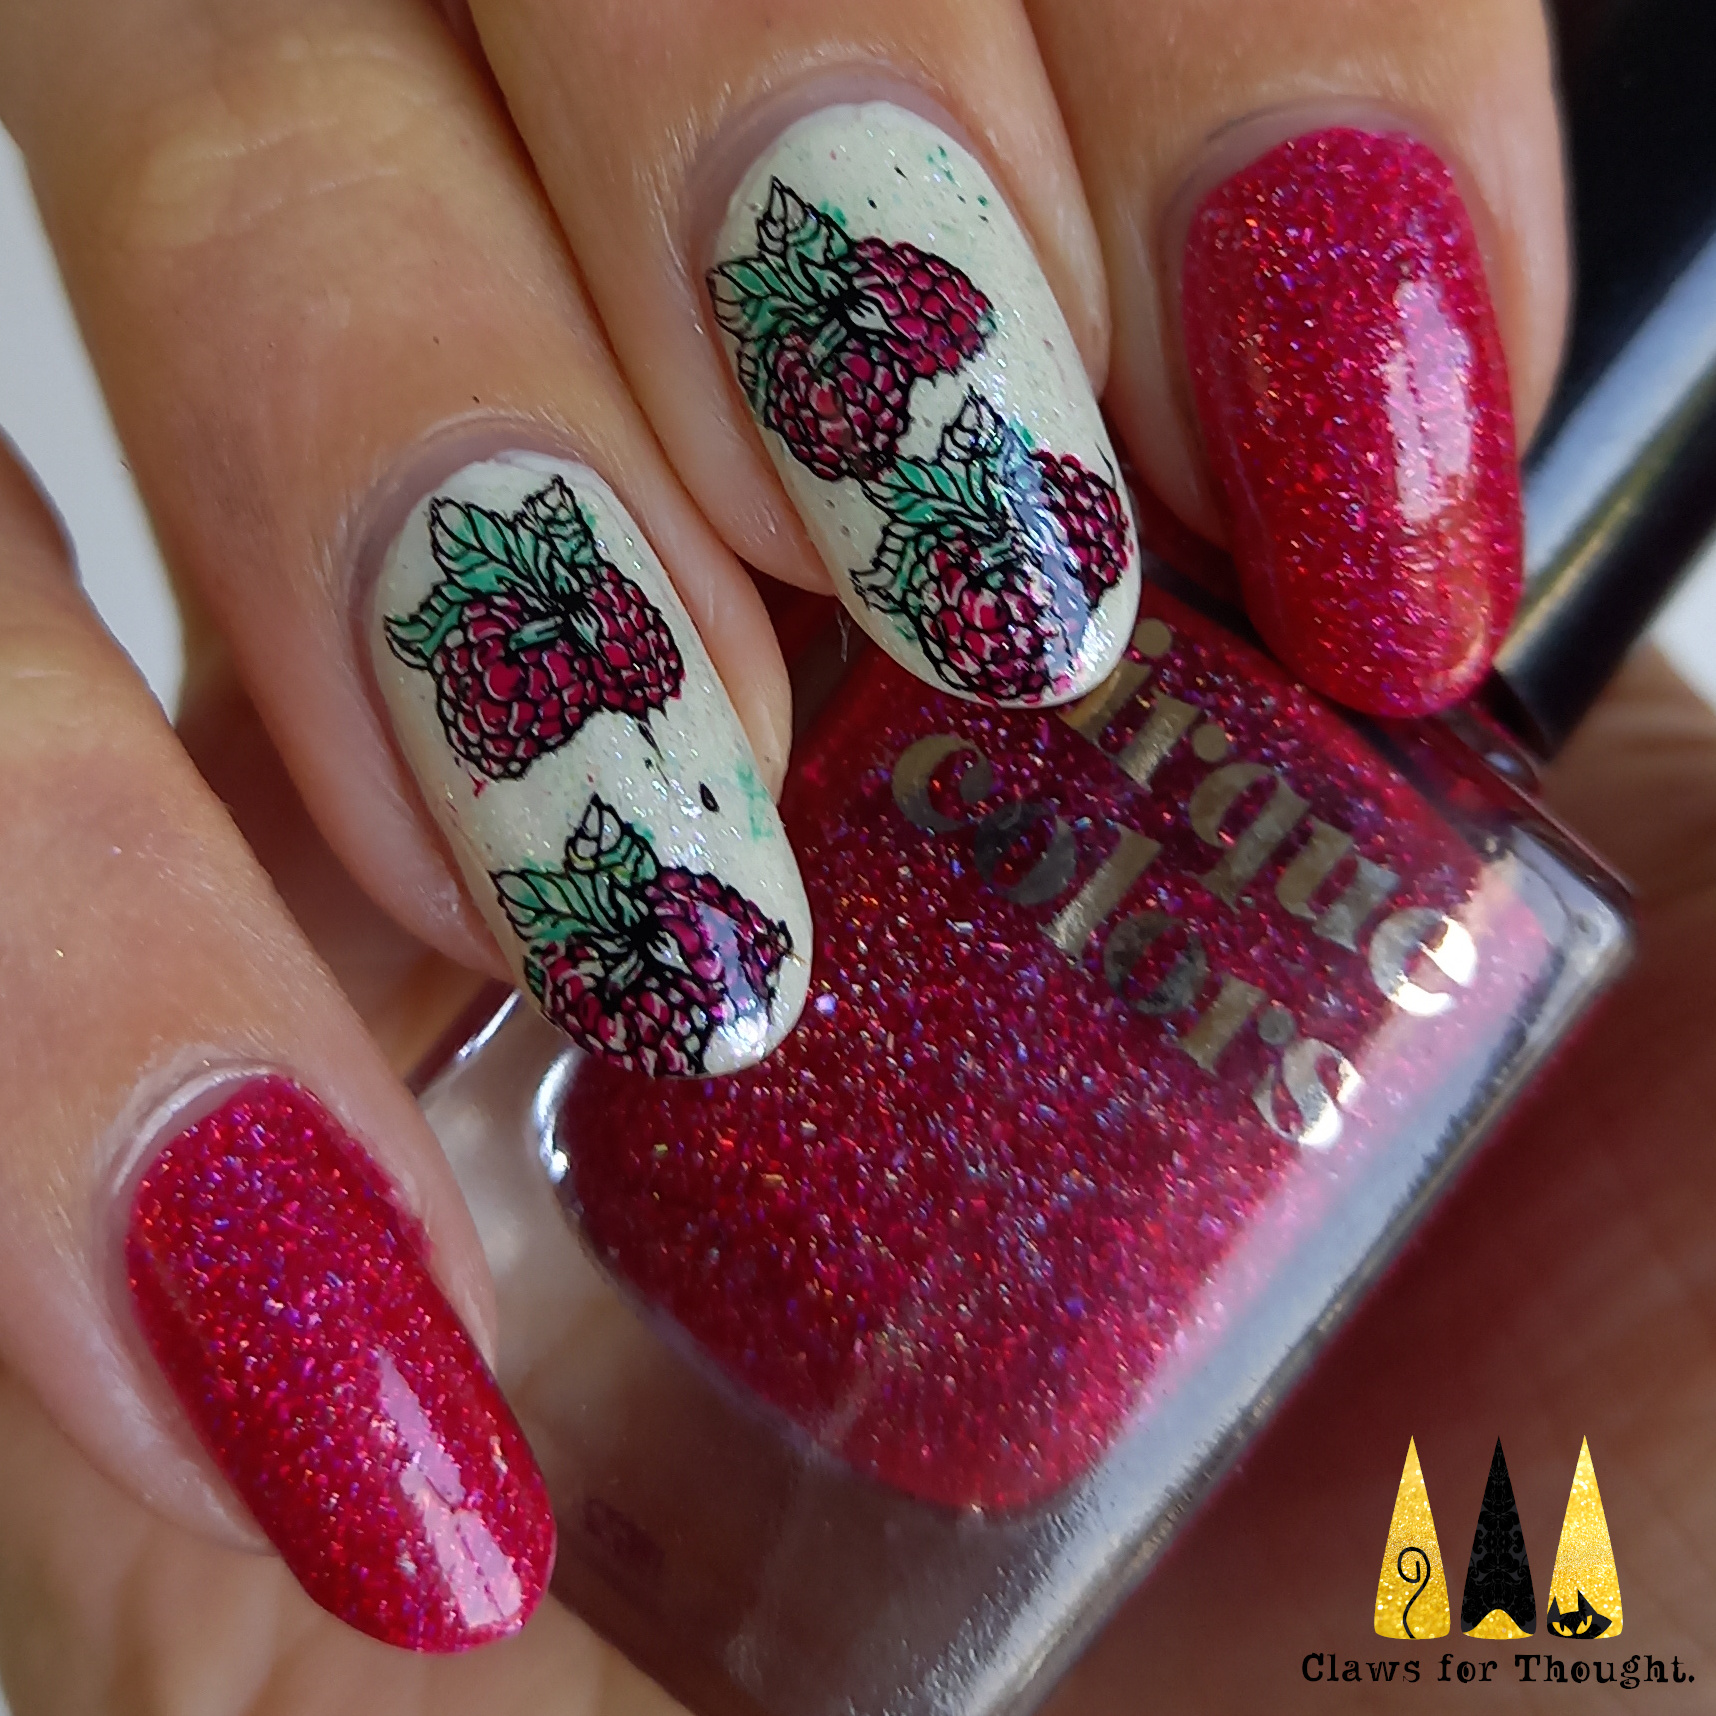 Claws For Thought: Jammy Raspberry Nails